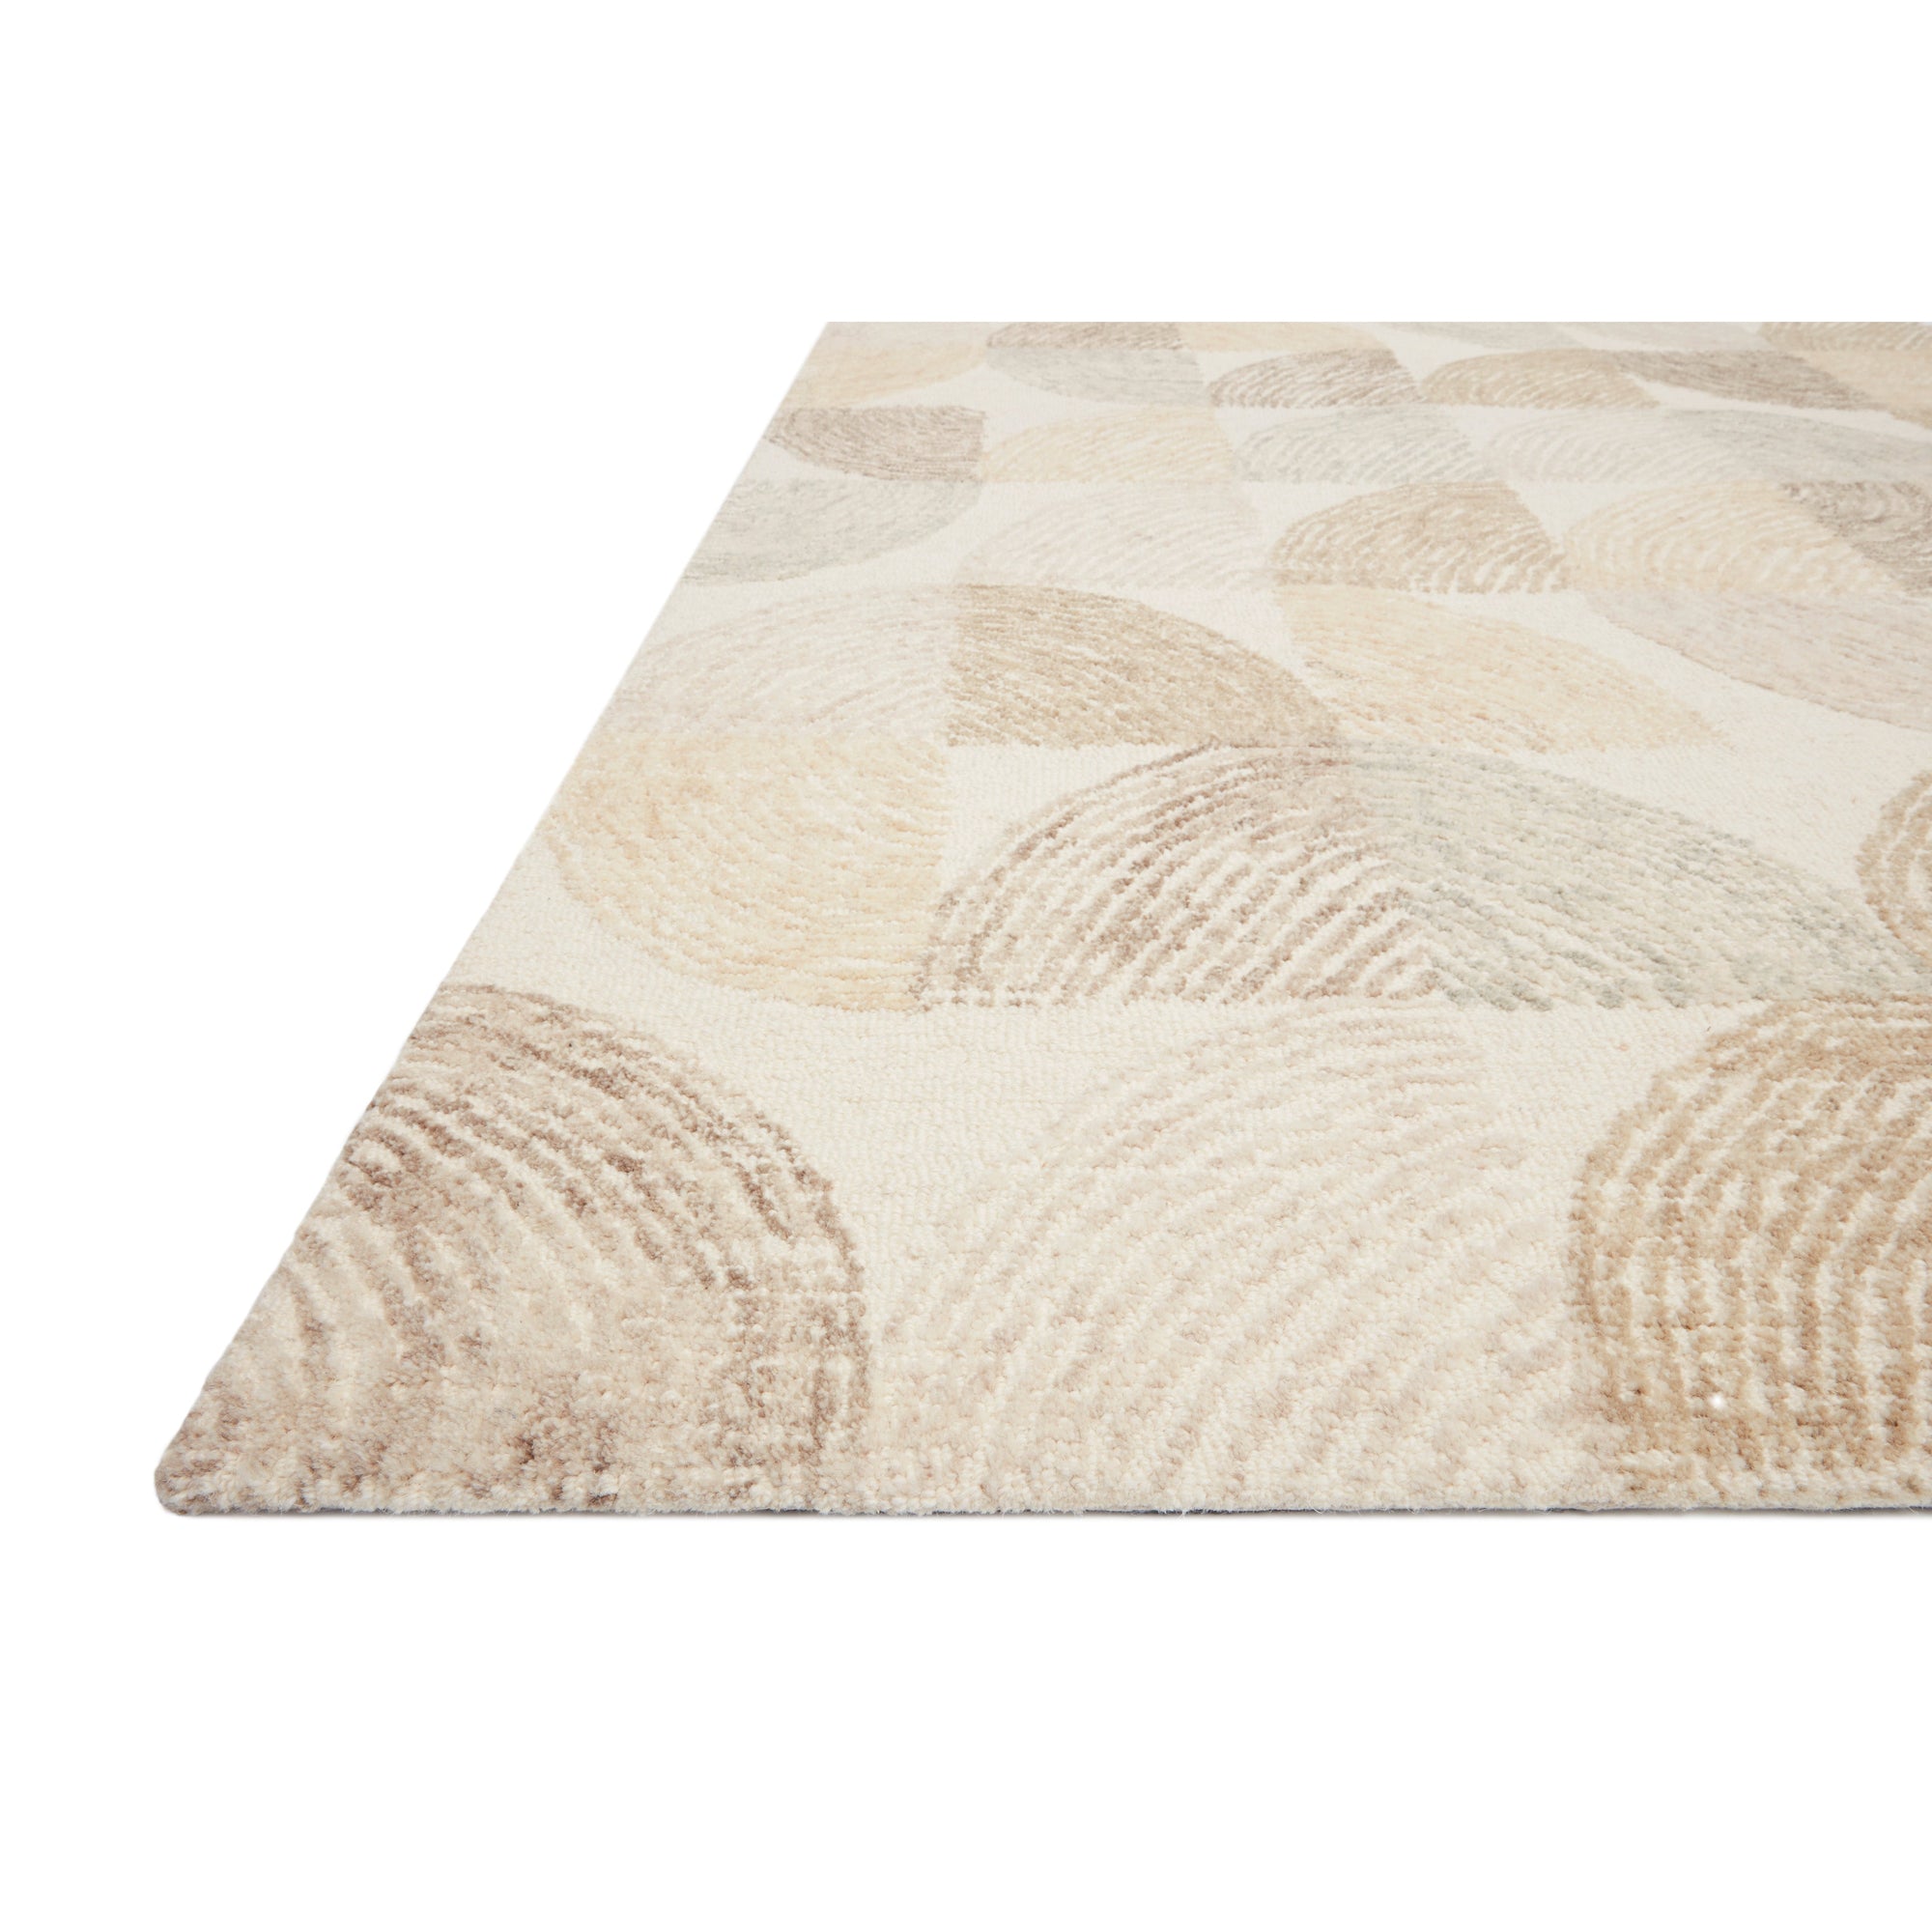 Rugs by Roo Loloi Milo Pebble Multi Area Rug in size 18" x 18" Sample